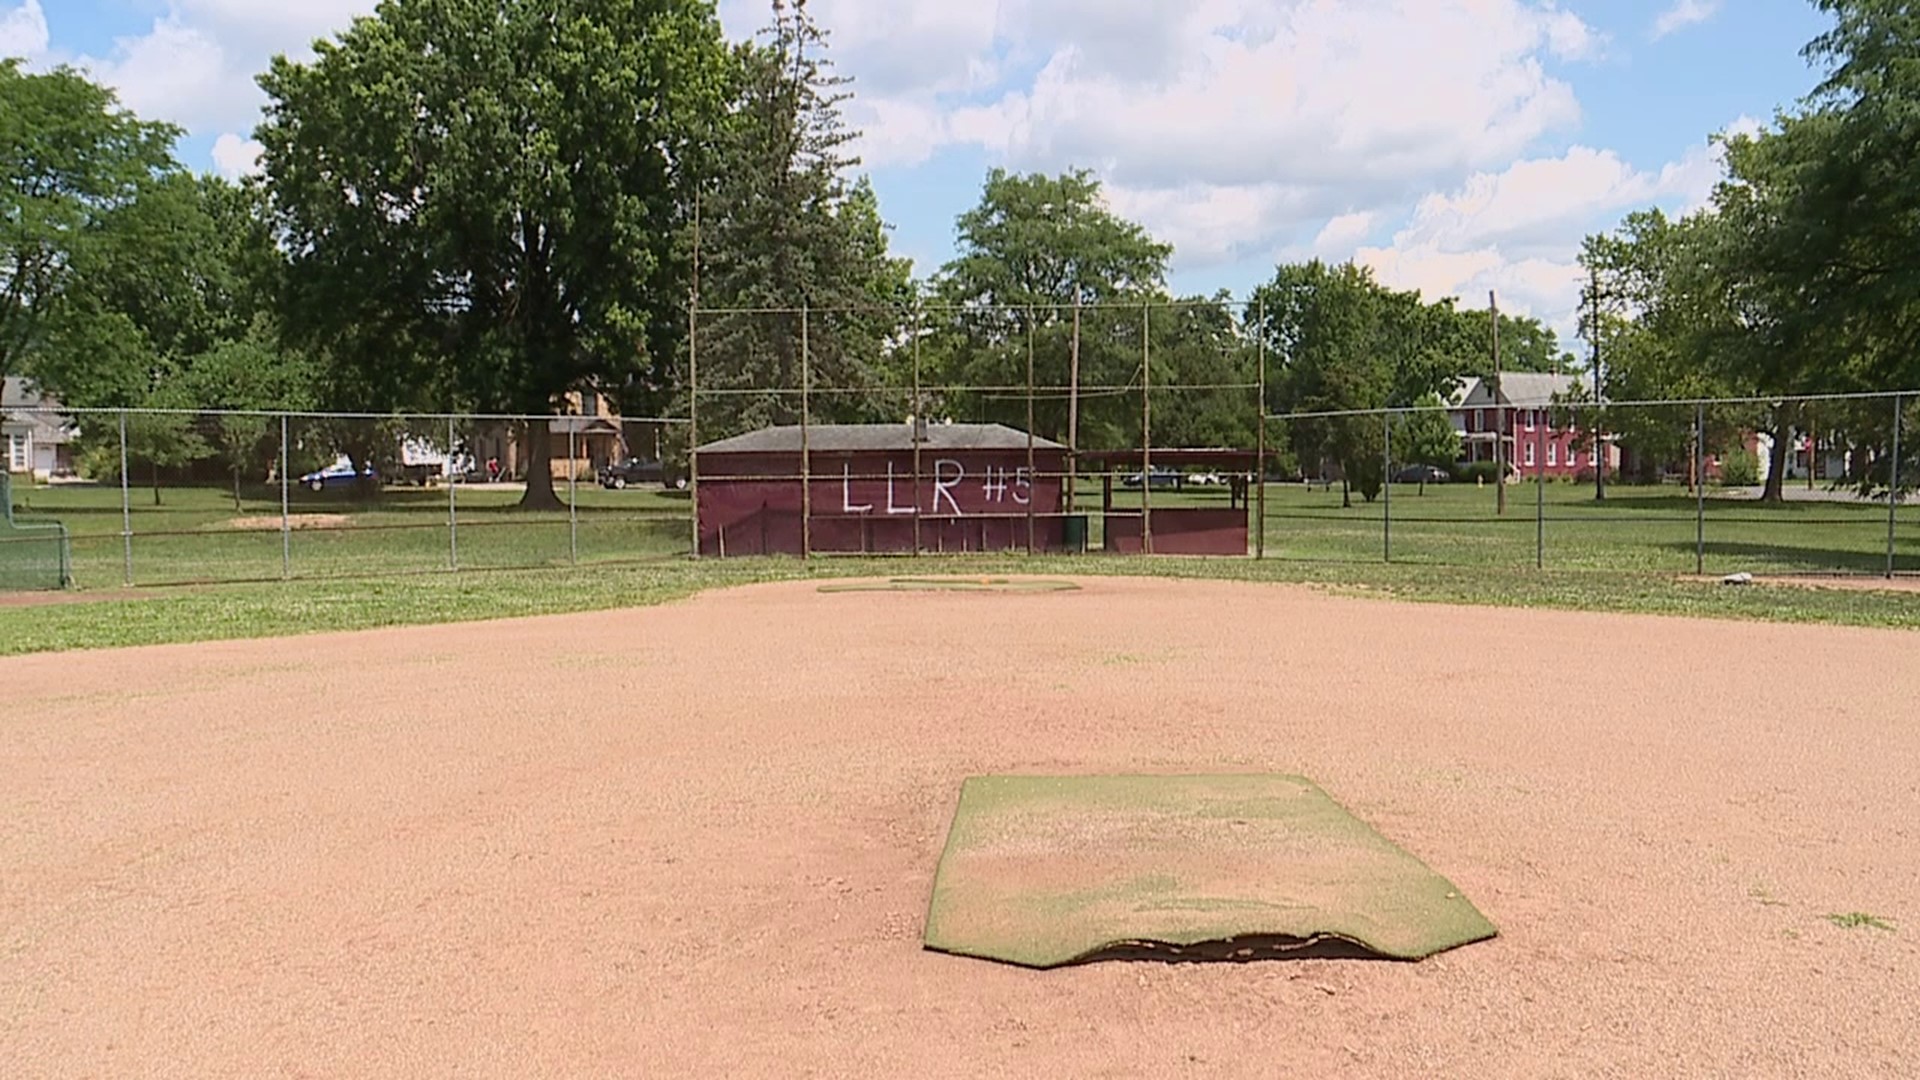 Williamsport's city council approved a proposal for Lycoming College to lease the senior baseball field in the city's Brandon Park for the next quarter of a century.